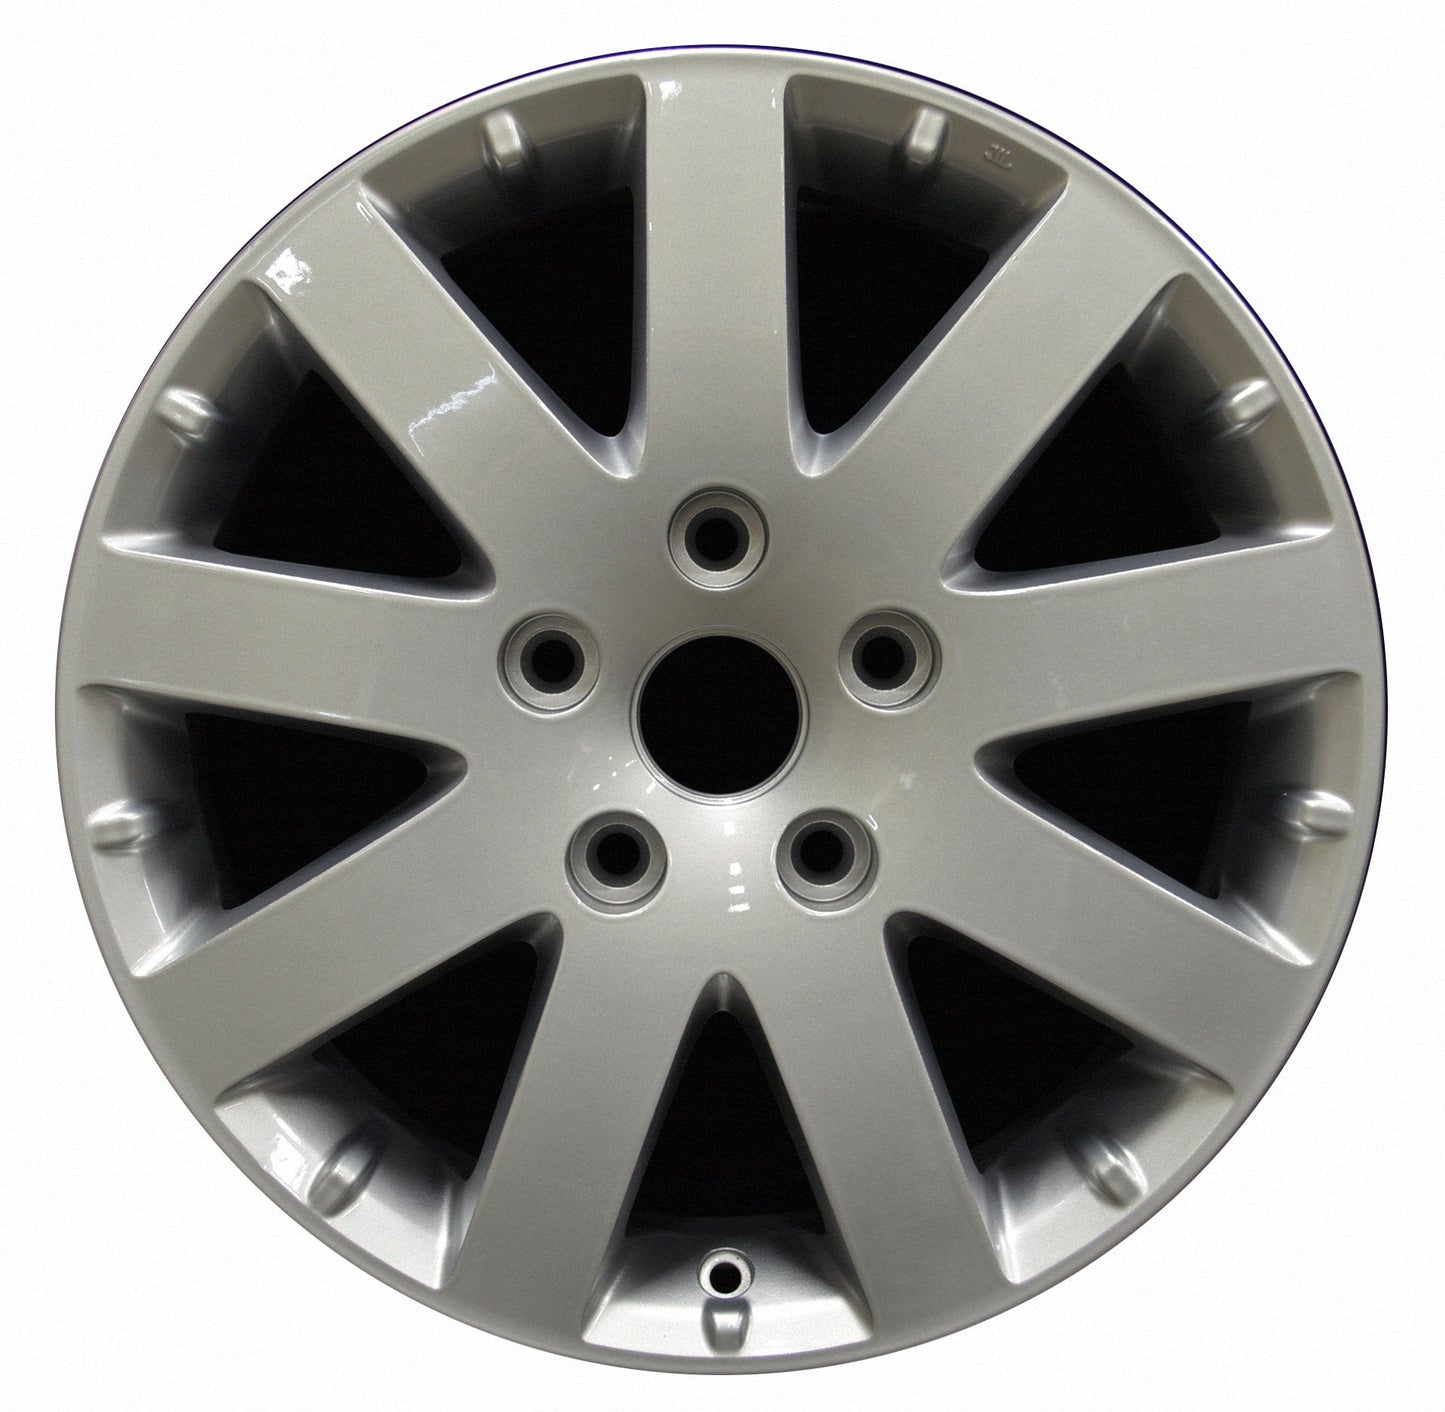 Chrysler Town & Country  2011, 2012, 2013, 2014, 2015, 2016 Factory OEM Car Wheel Size 17x6.5 Alloy WAO.2401.LS100V1.FF